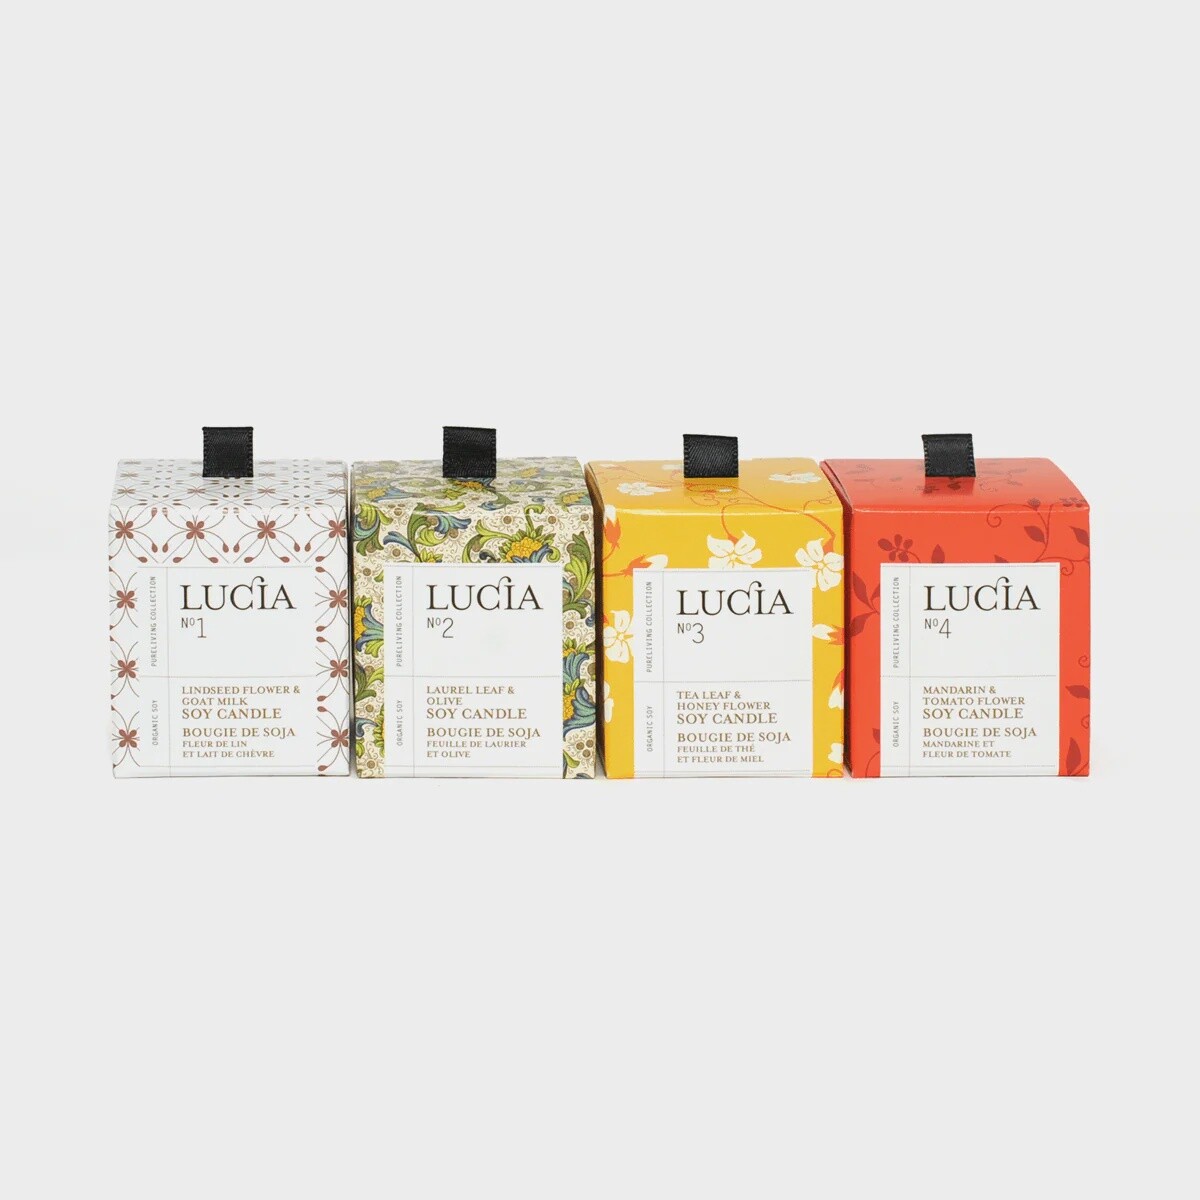 Lucia assorted 4 votive scented candles